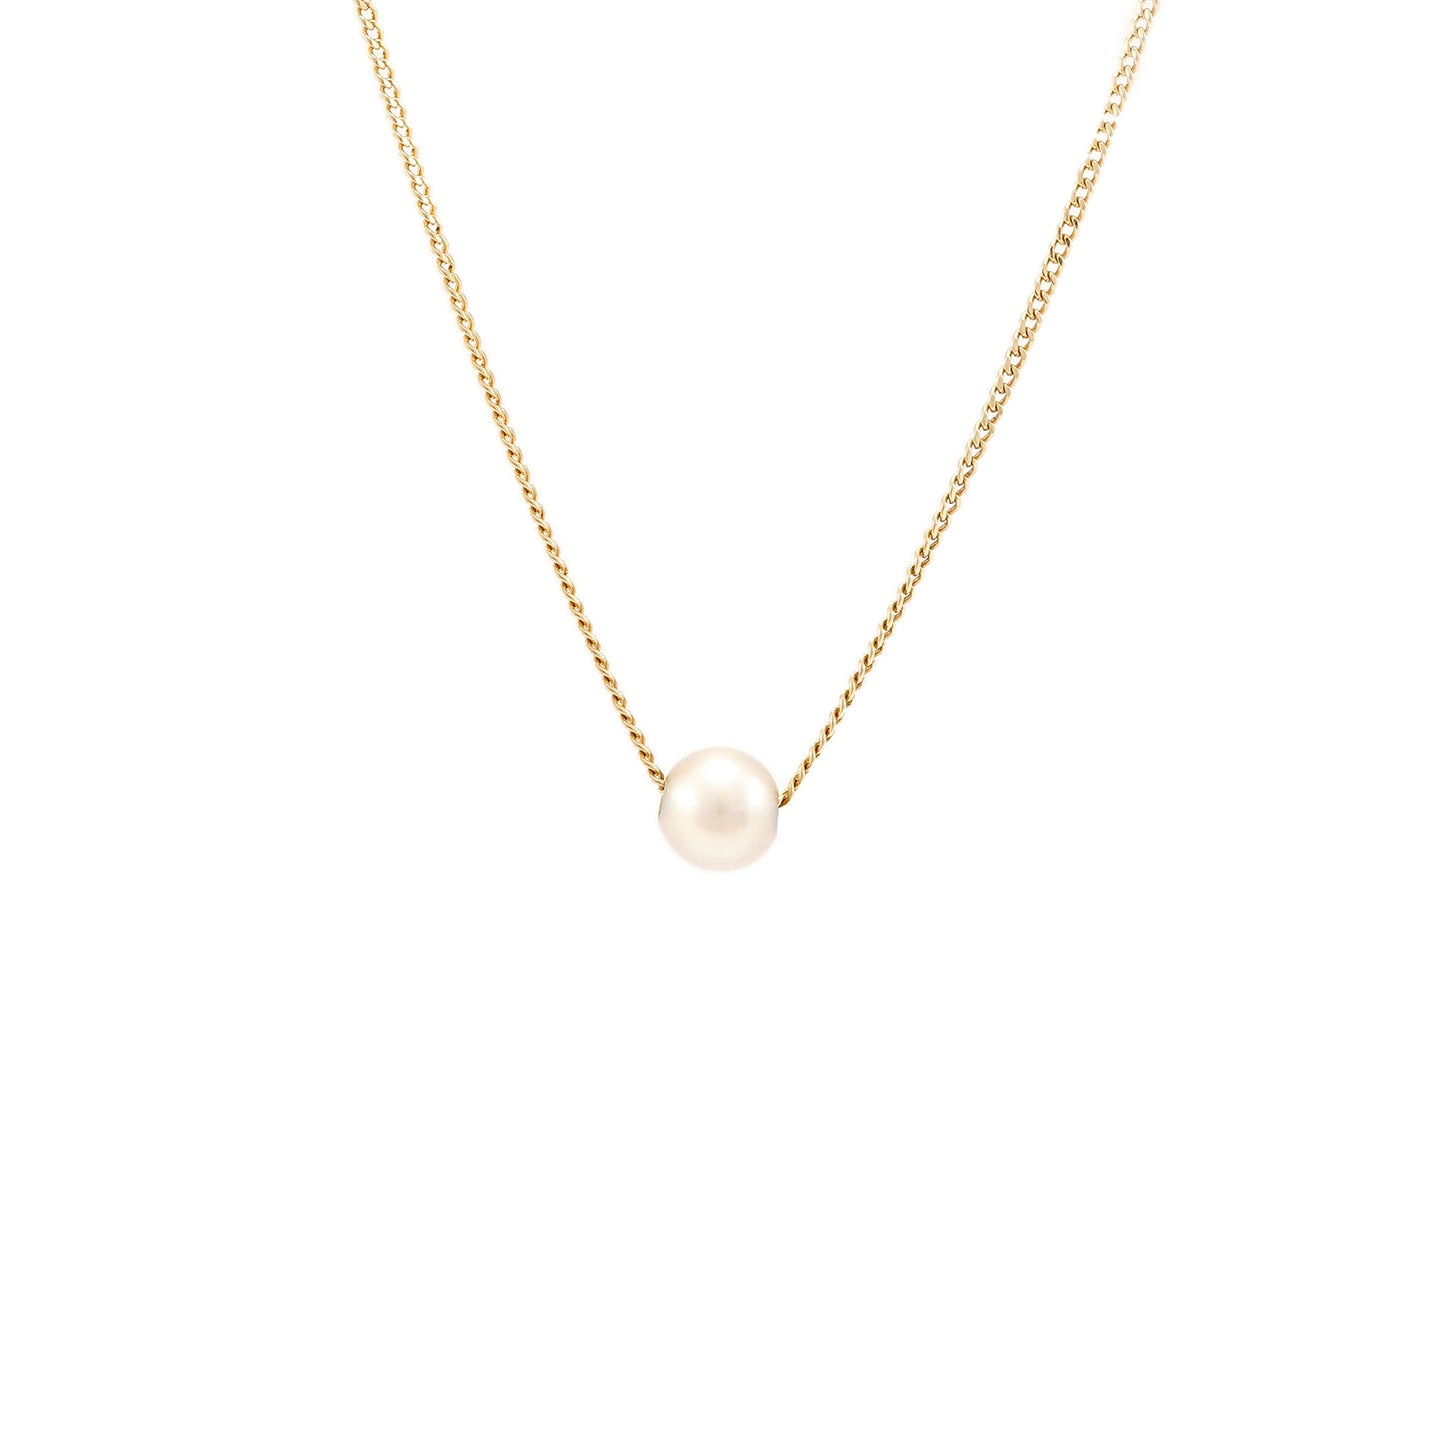 Chain tank yellow gold pearl 585 14K 43cm women's jewelry pearl pendant necklace